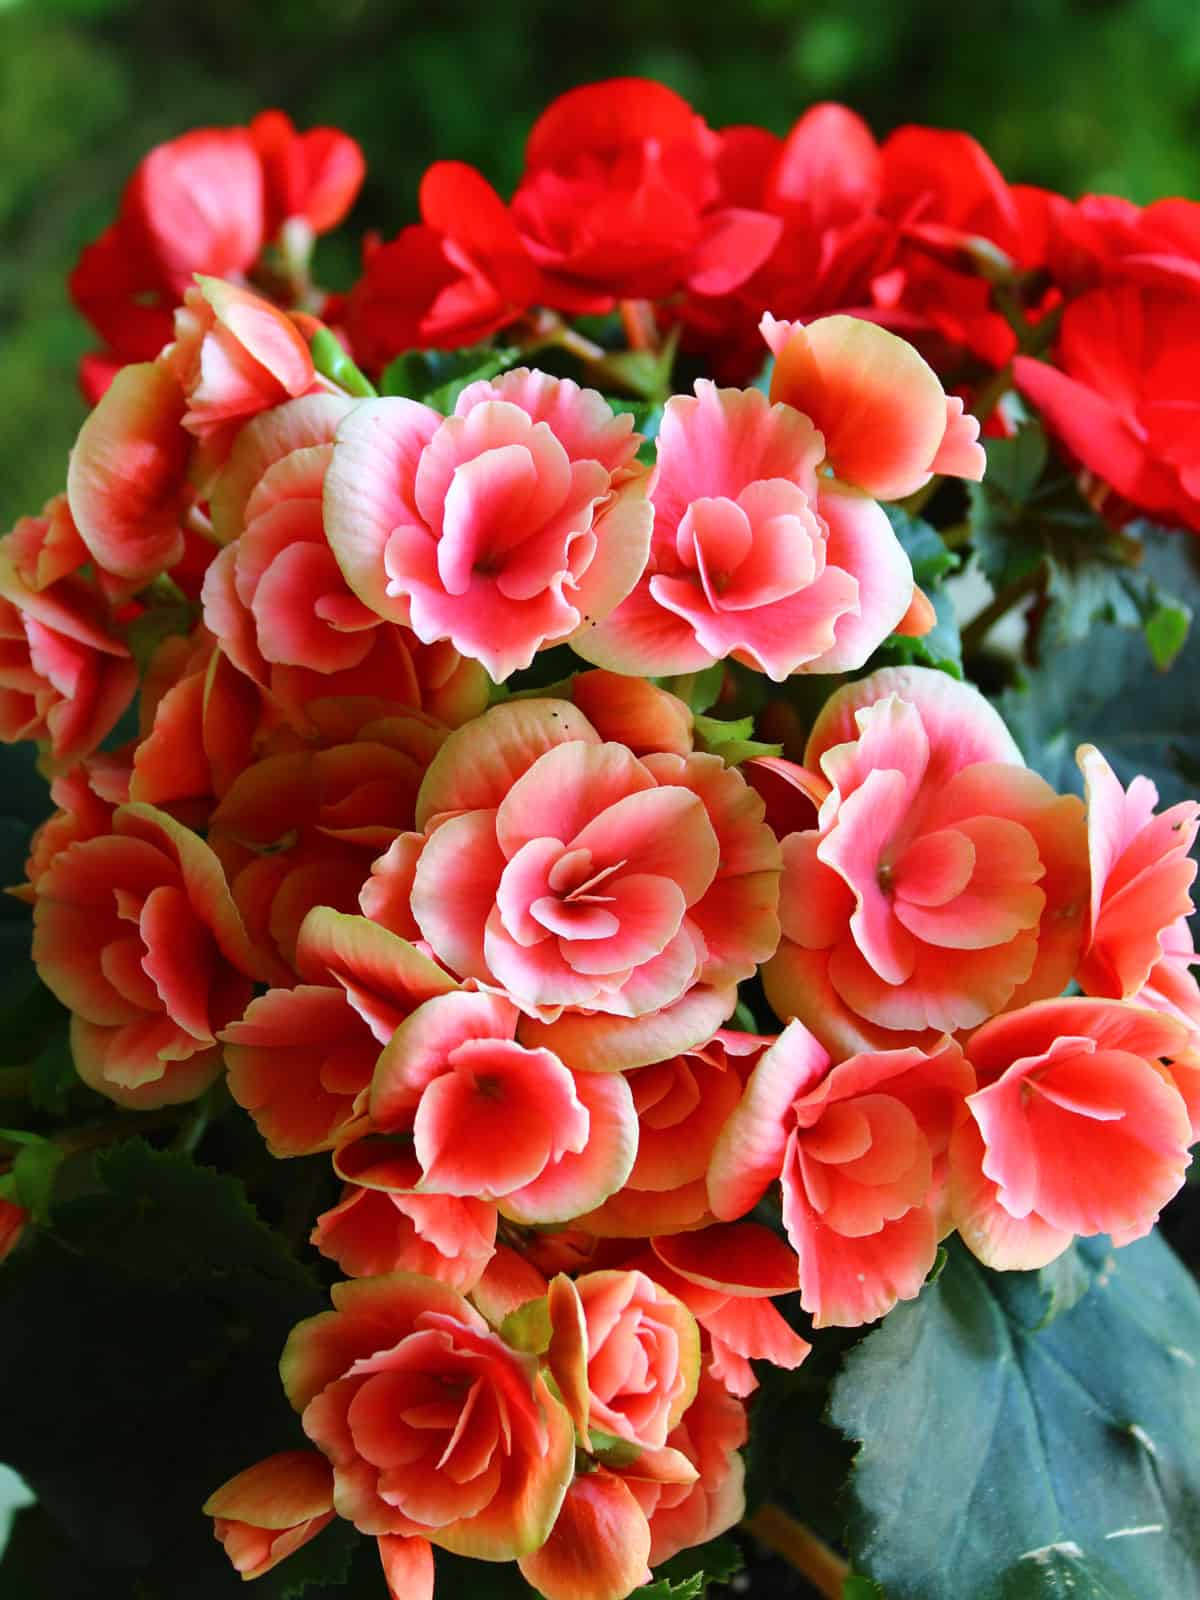 Mixture of deep pink and red colors of a Begonia plant